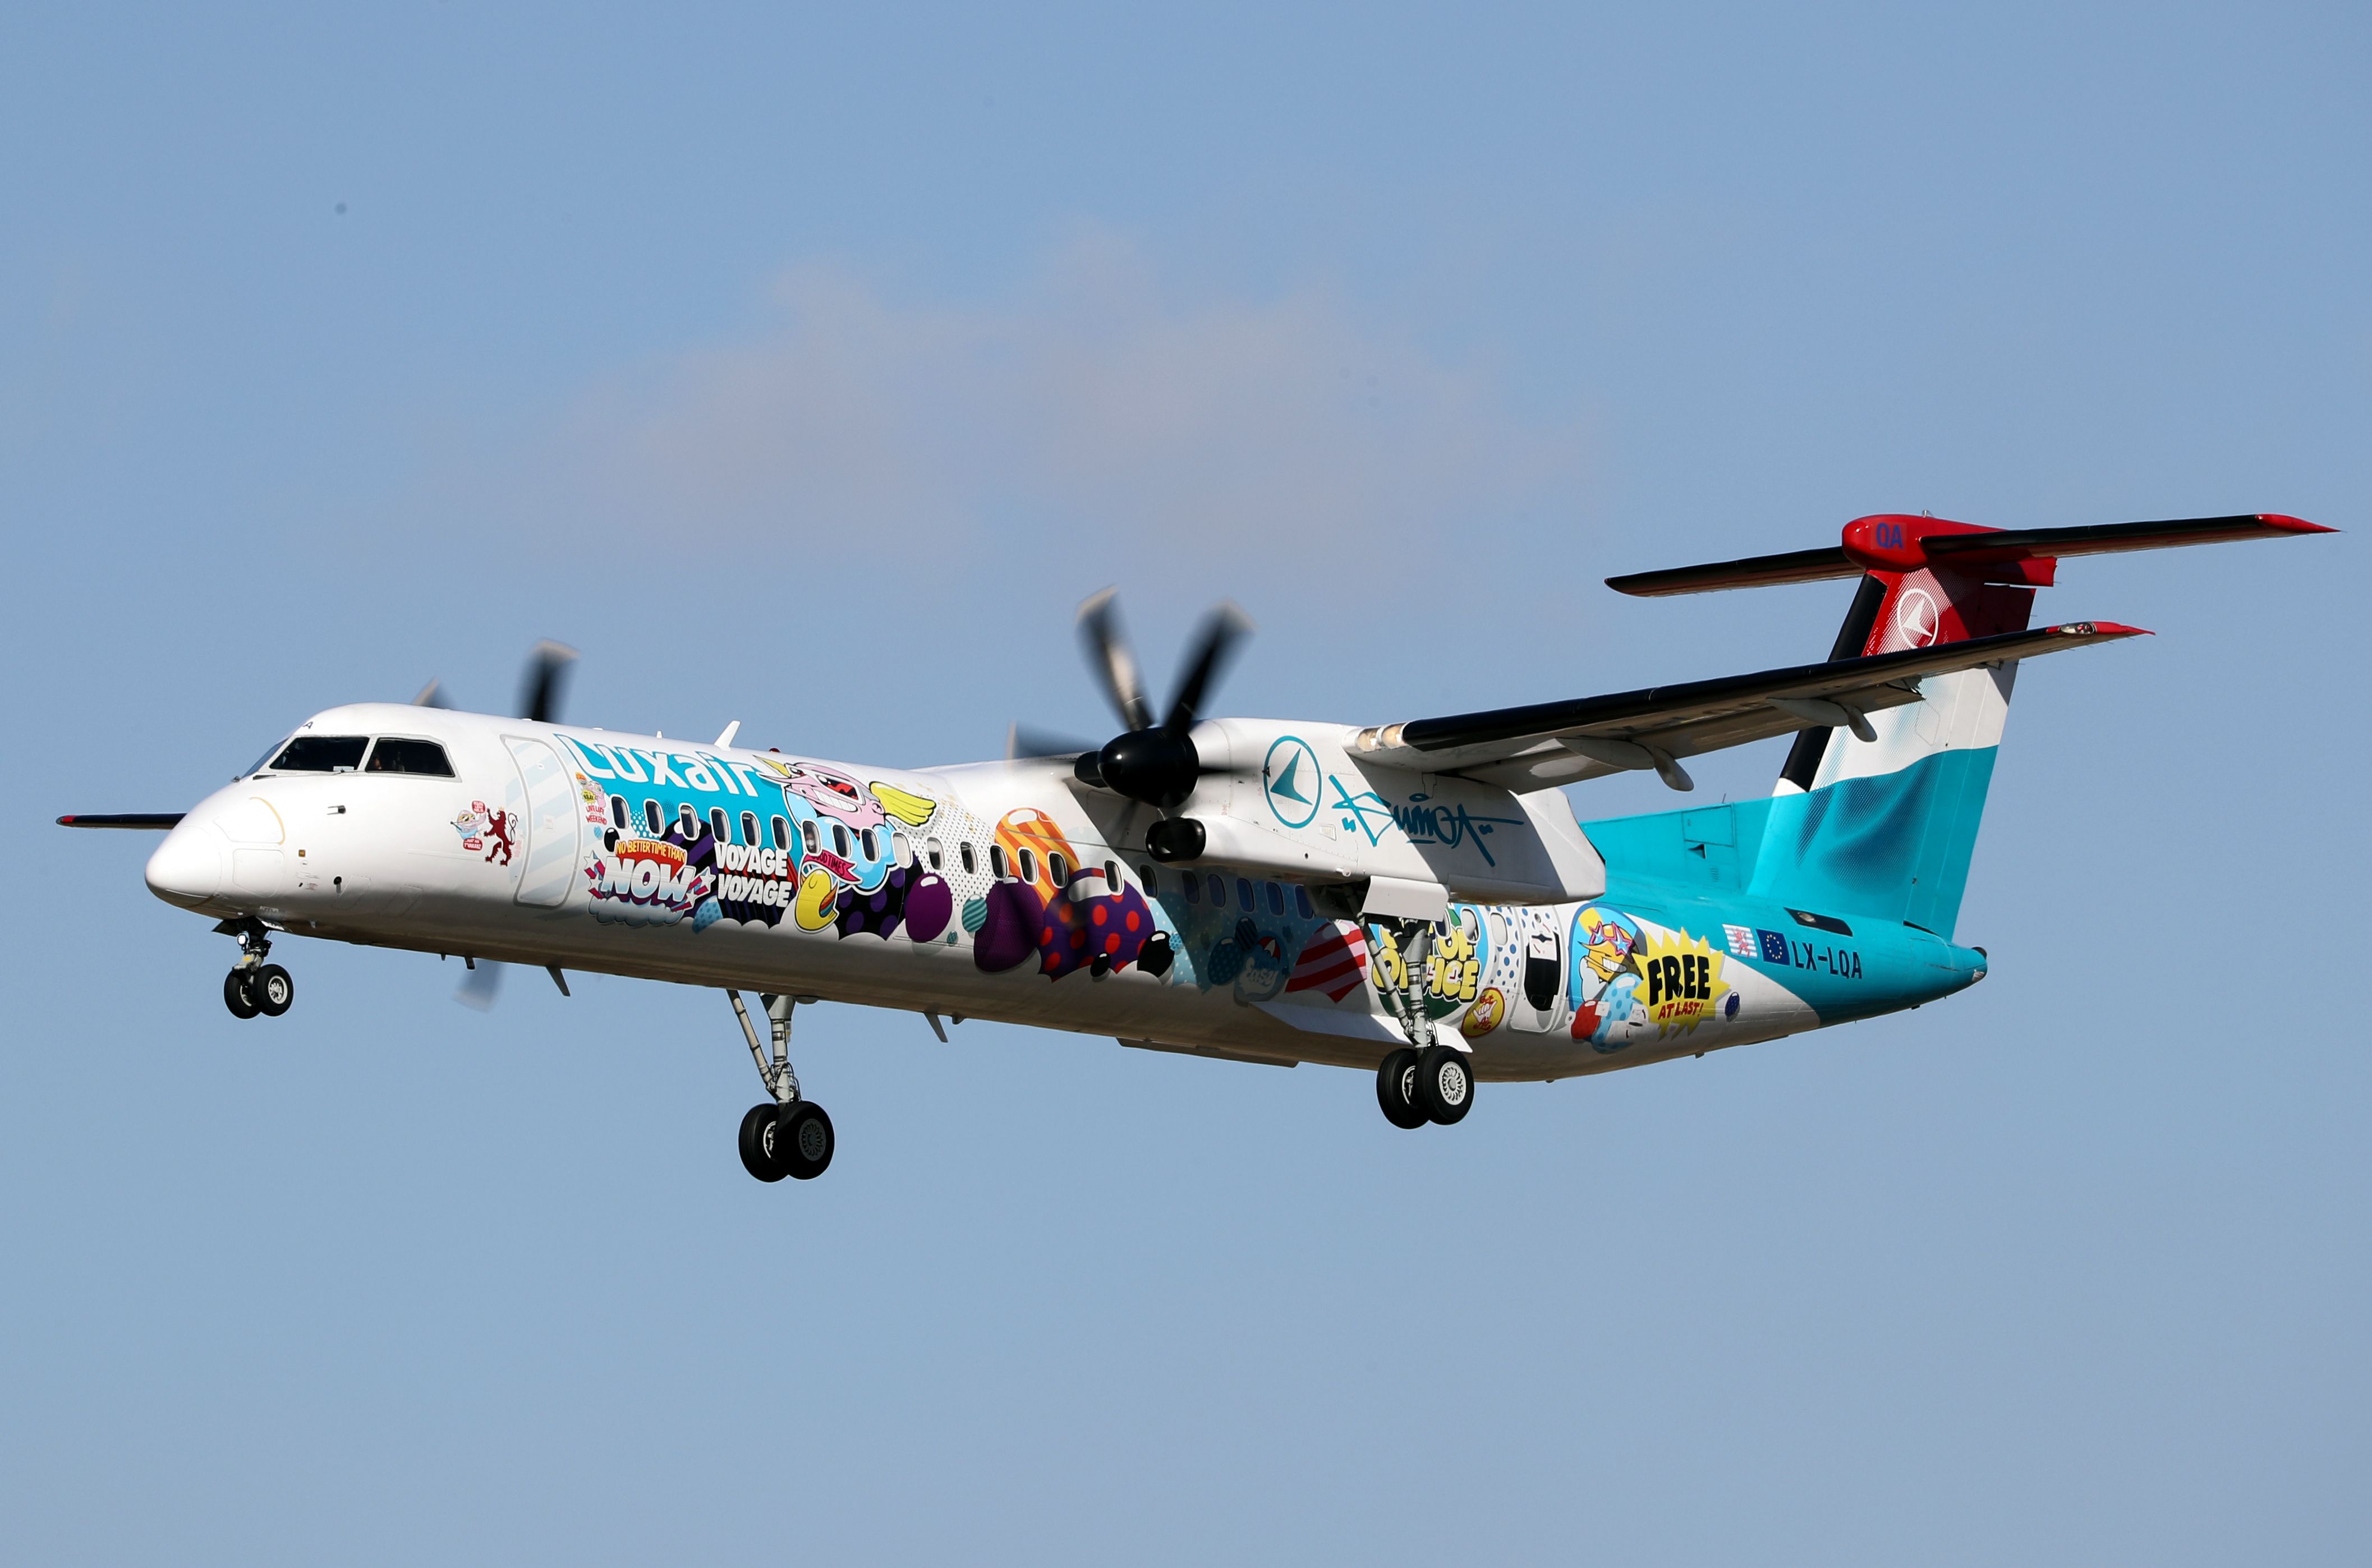 Luxair Dash 8-400